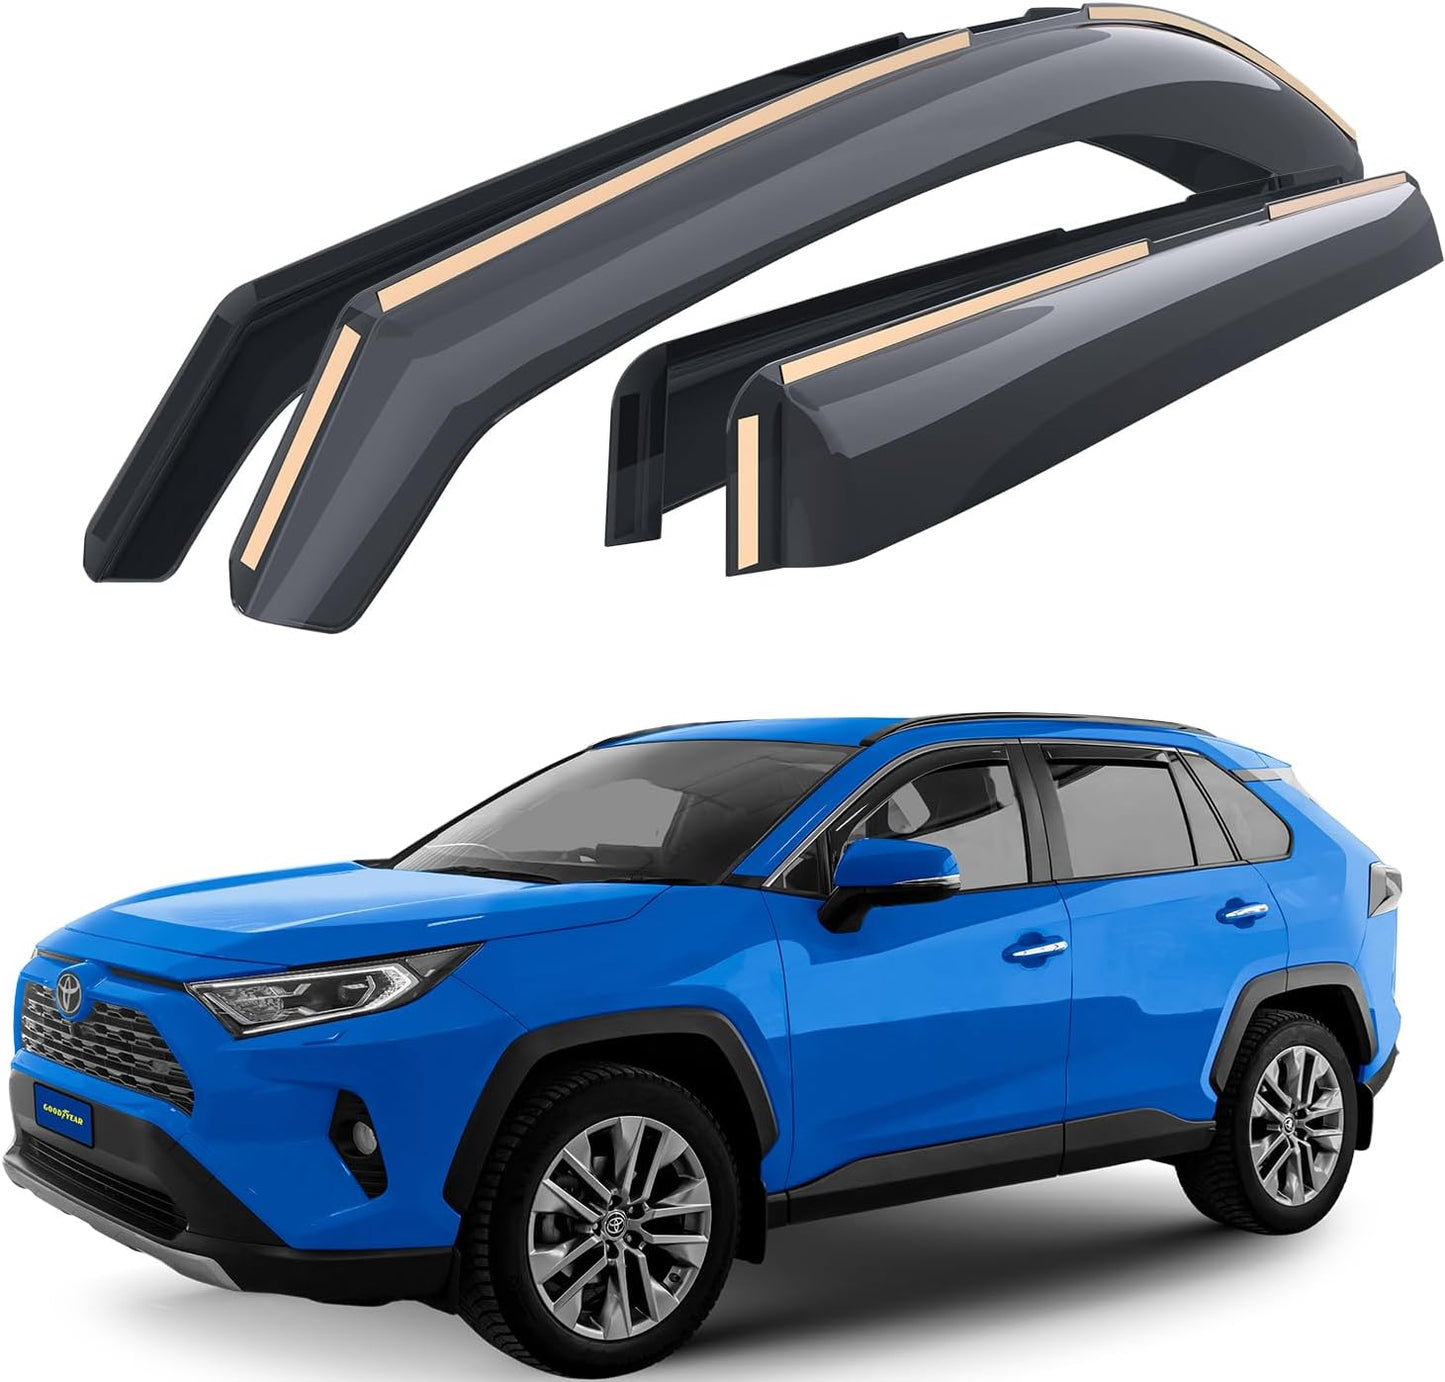 Goodyear Shatterproof in-Channel Window Deflectors for Toyota RAV4 2019-2024, Rain Guards, Window Visors for Cars, Vent Deflector, Car Accessories, 4 pcs - GY007883